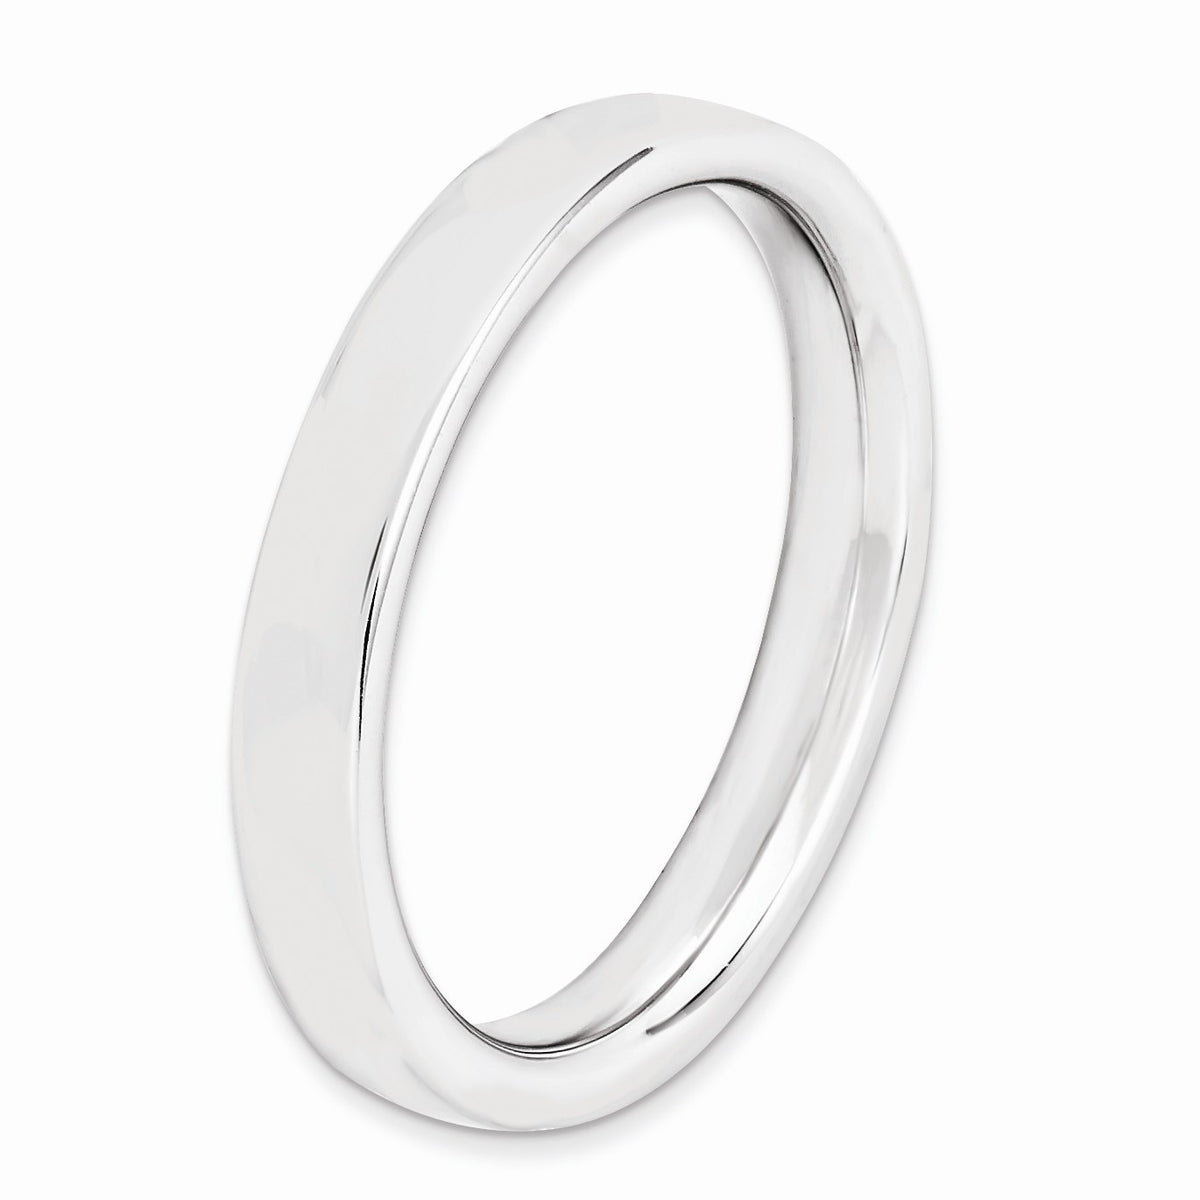 Alternate view of the Sterling Silver Stackable Polished Flat 3.5mm Band by The Black Bow Jewelry Co.